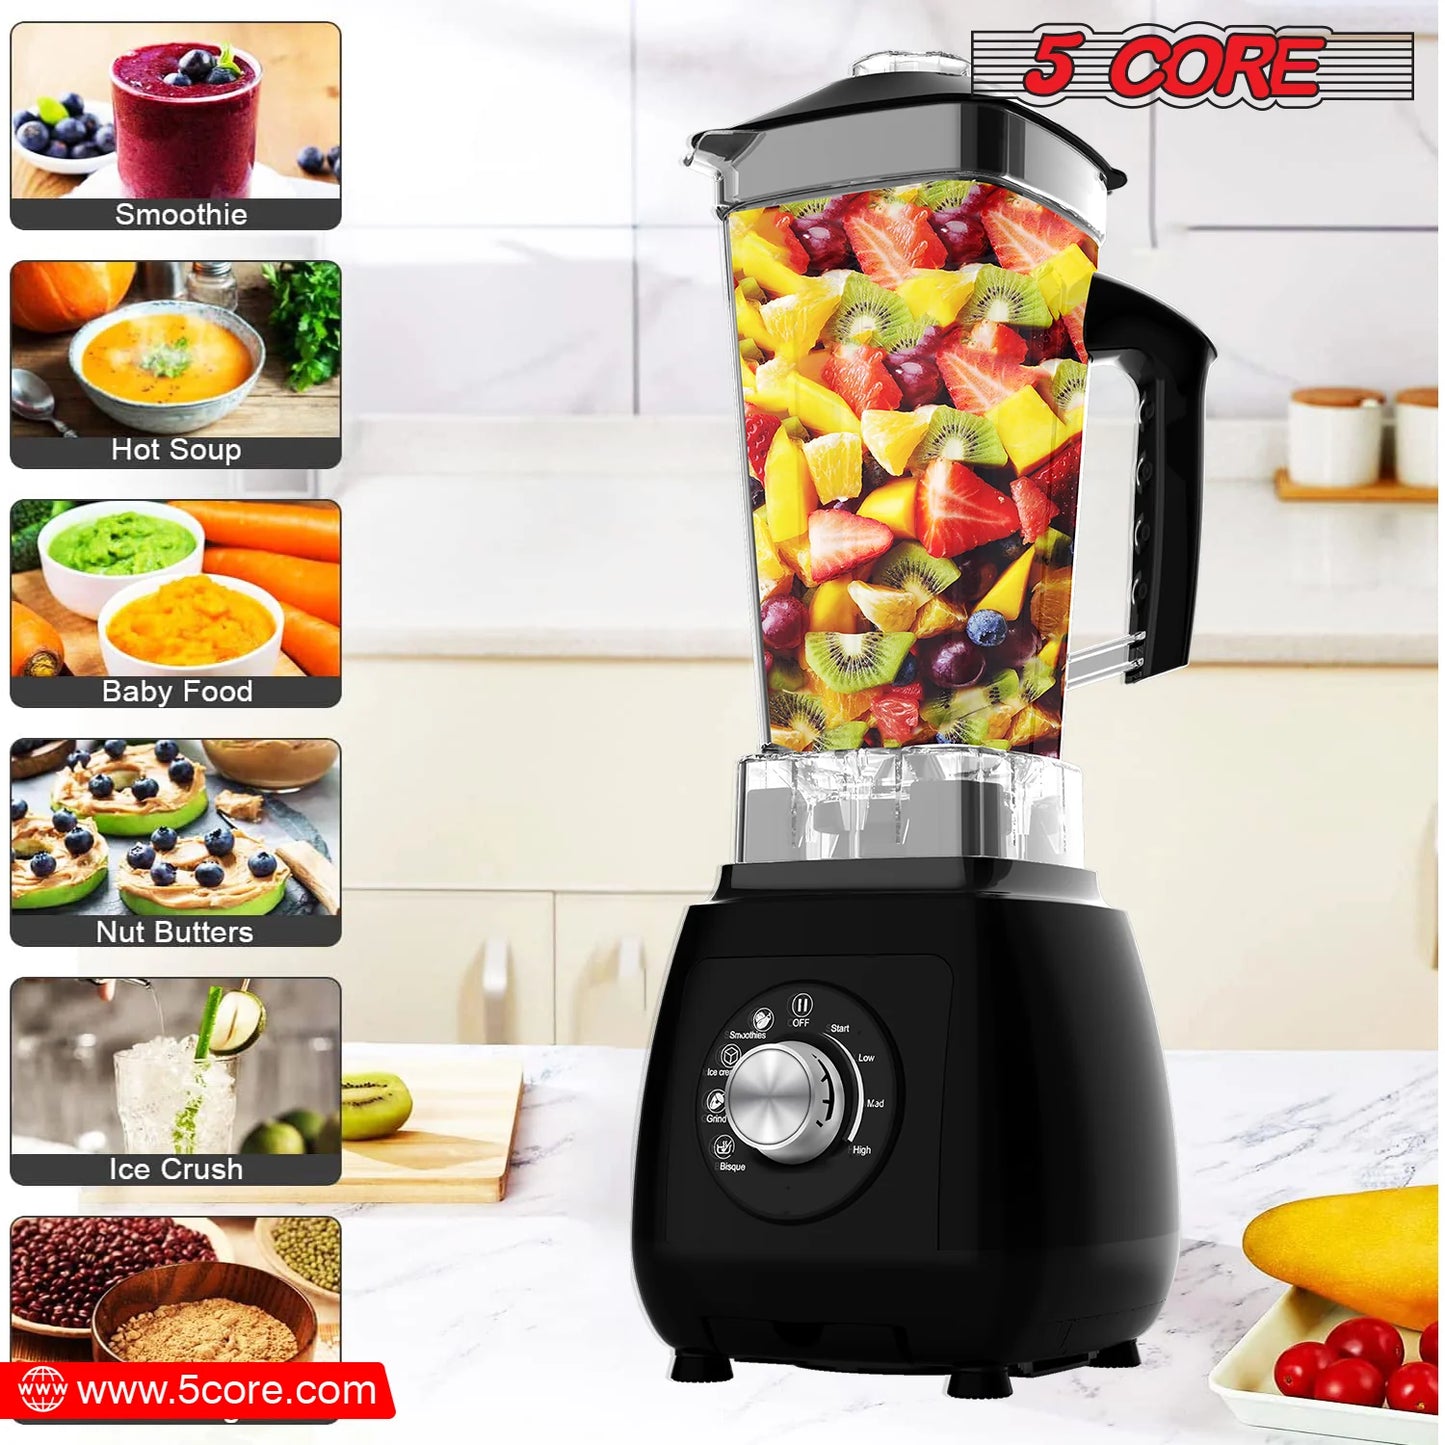 5 Core Personal Blender for Shakes & Smoothies/ Portable Blender 68 Oz Capacity, Titanium Blade, Travel Cup & Lid/ Heavy-Duty Portable Blender & Food Processor Ideal for Juices, Baby Food- JB 2000 M